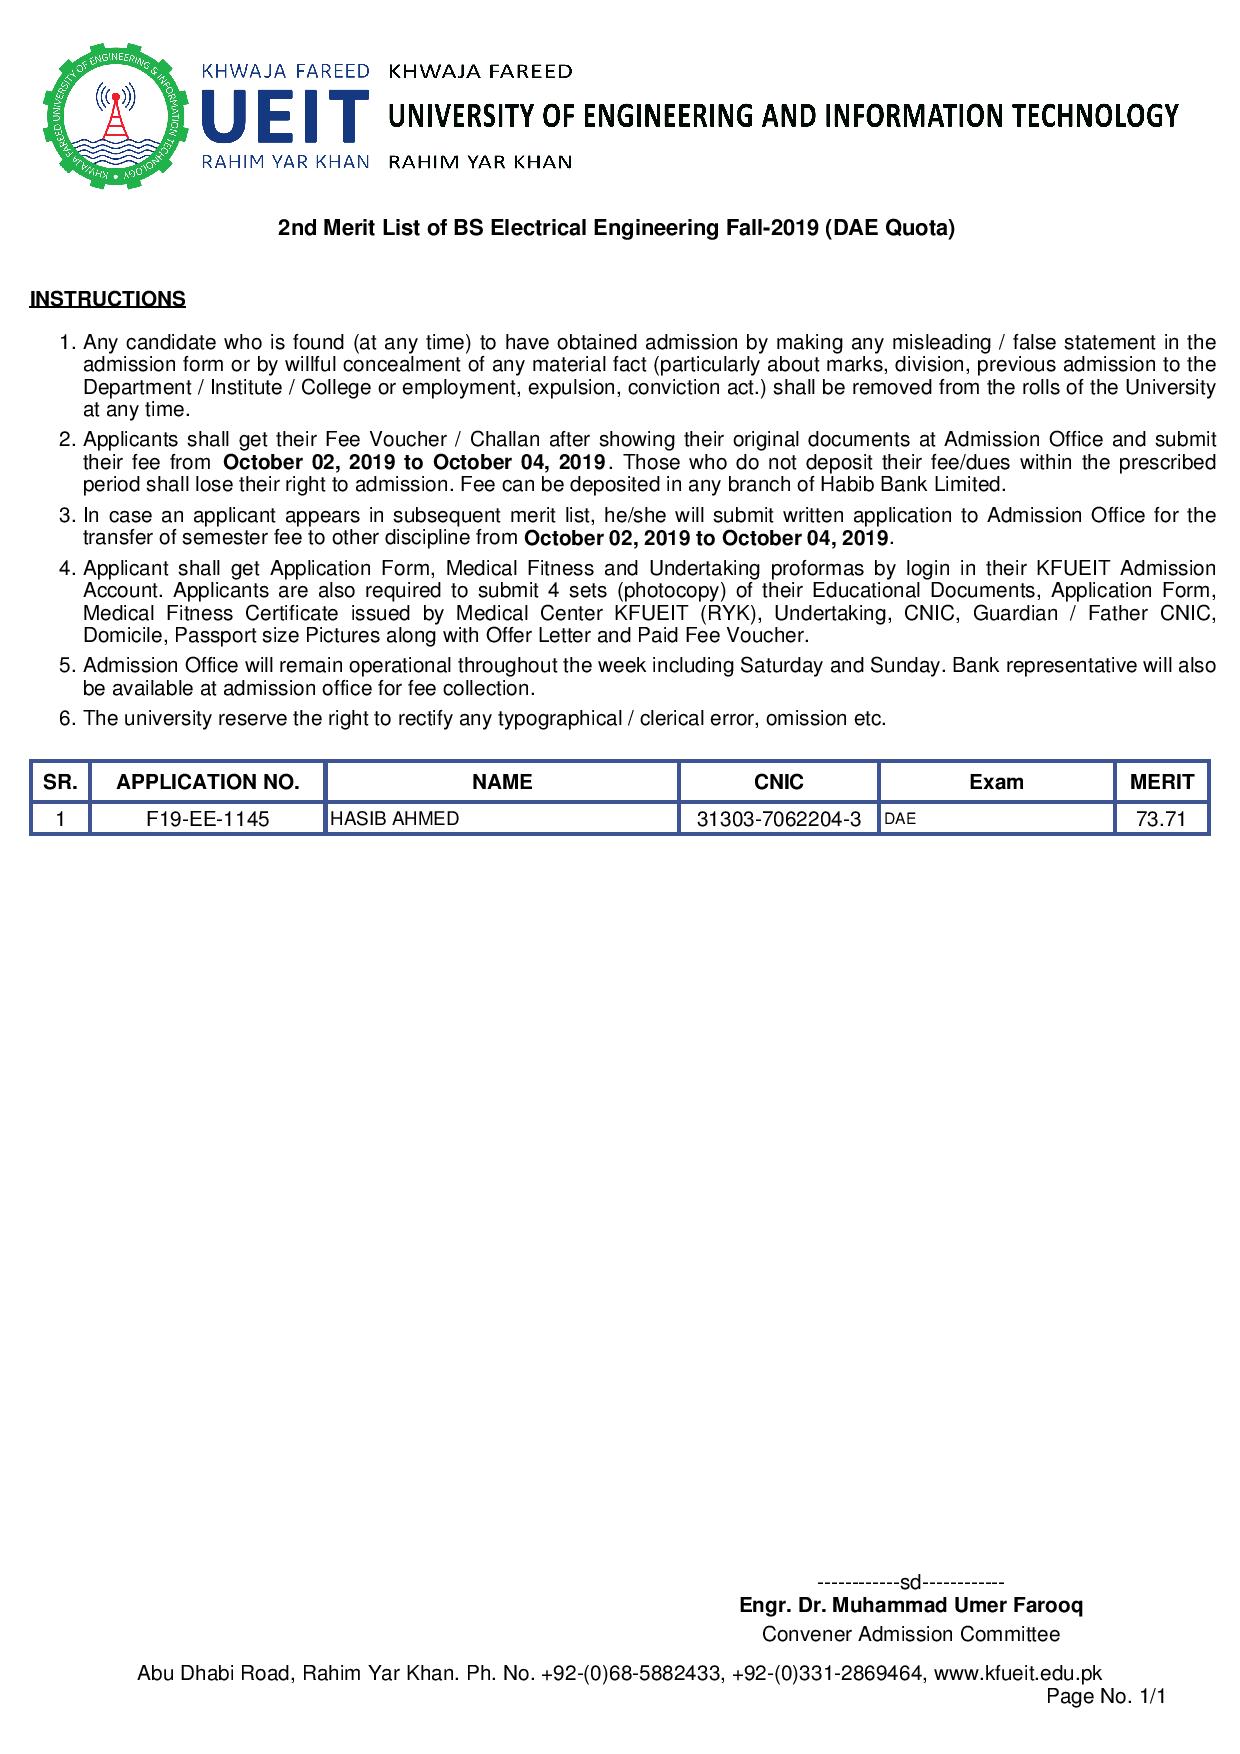 BS Electrical Engineering Fall-2019 (DAE Quota)-page-001-1